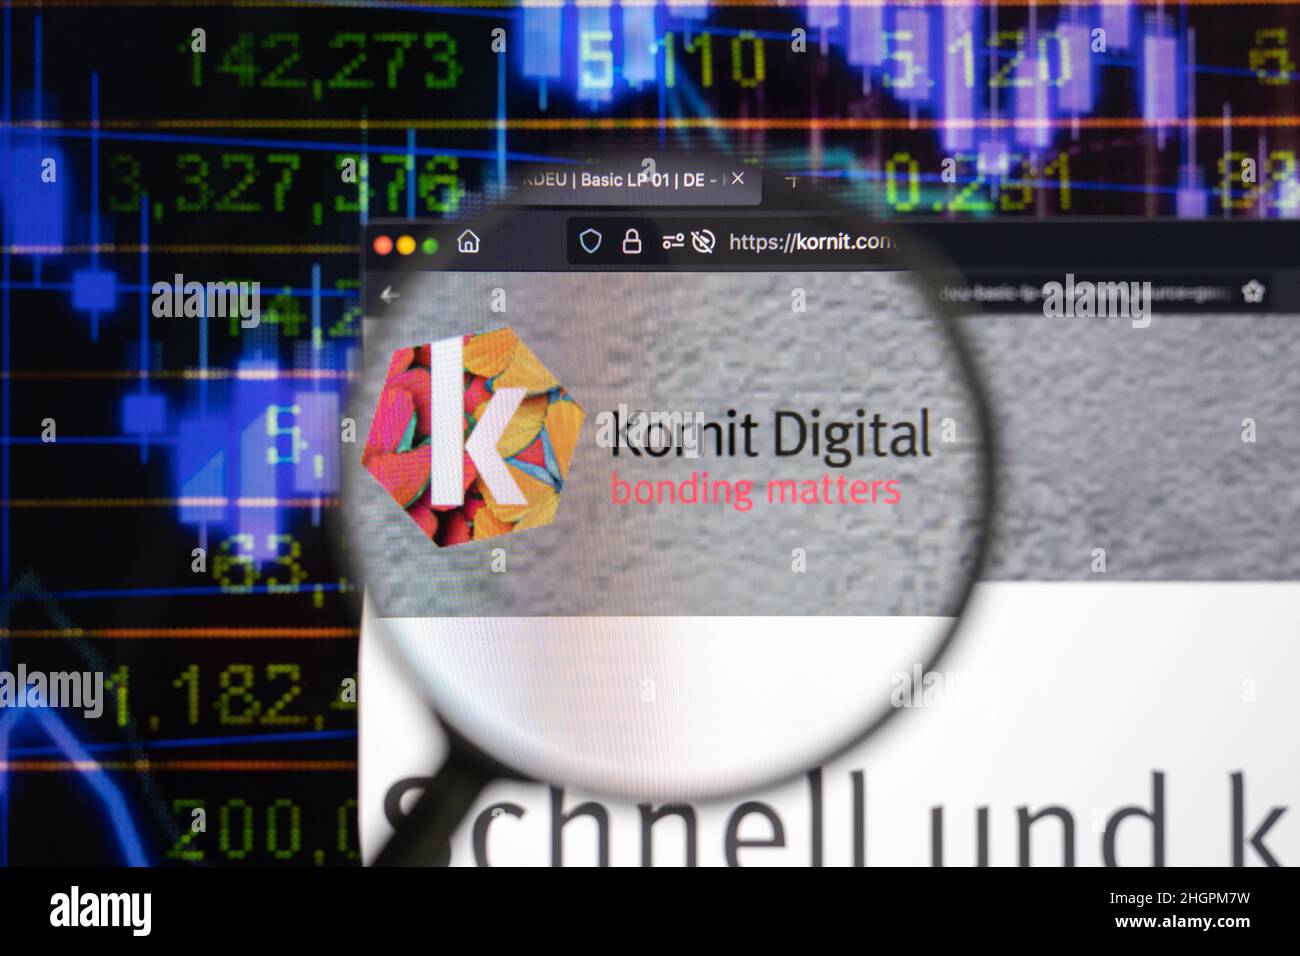 Kornit Digital company logo on a website with blurry stock market developments in the background, seen on a computer screen through a magnifying glass Stock Photo